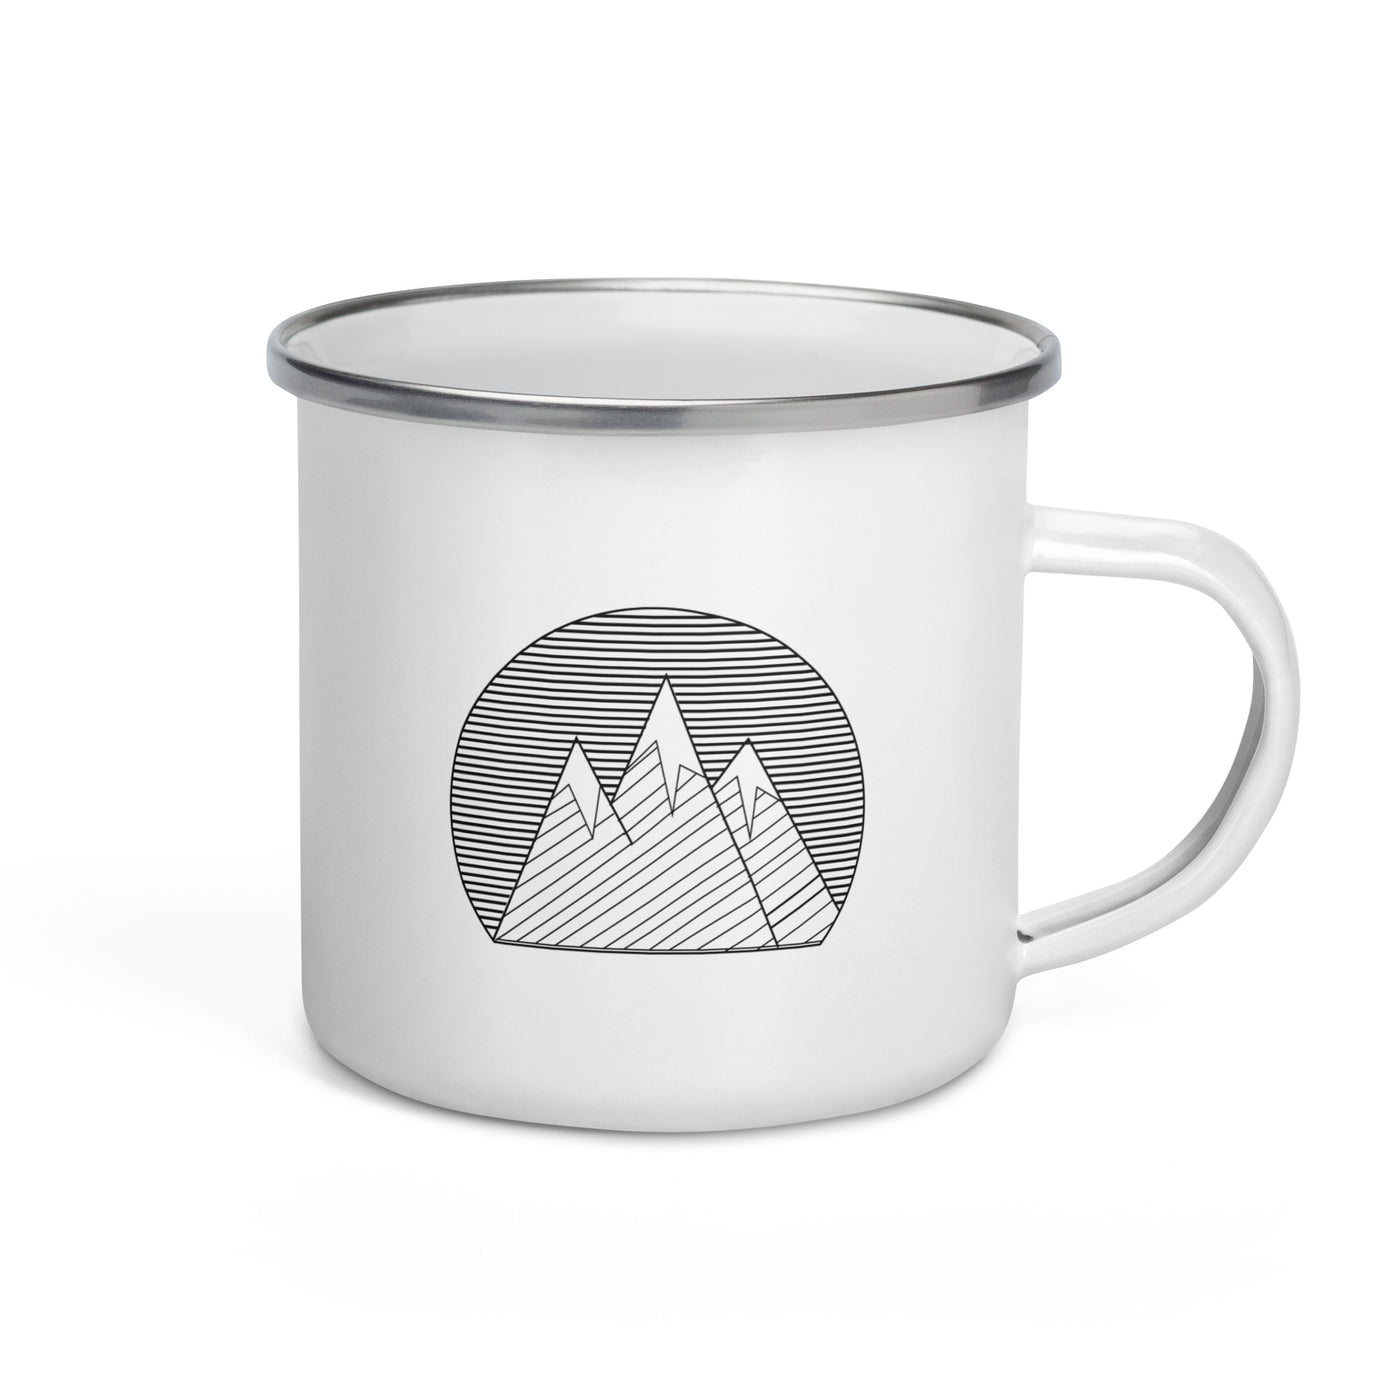 Circle - Mountain (9) - Emaille Tasse berge Default Title